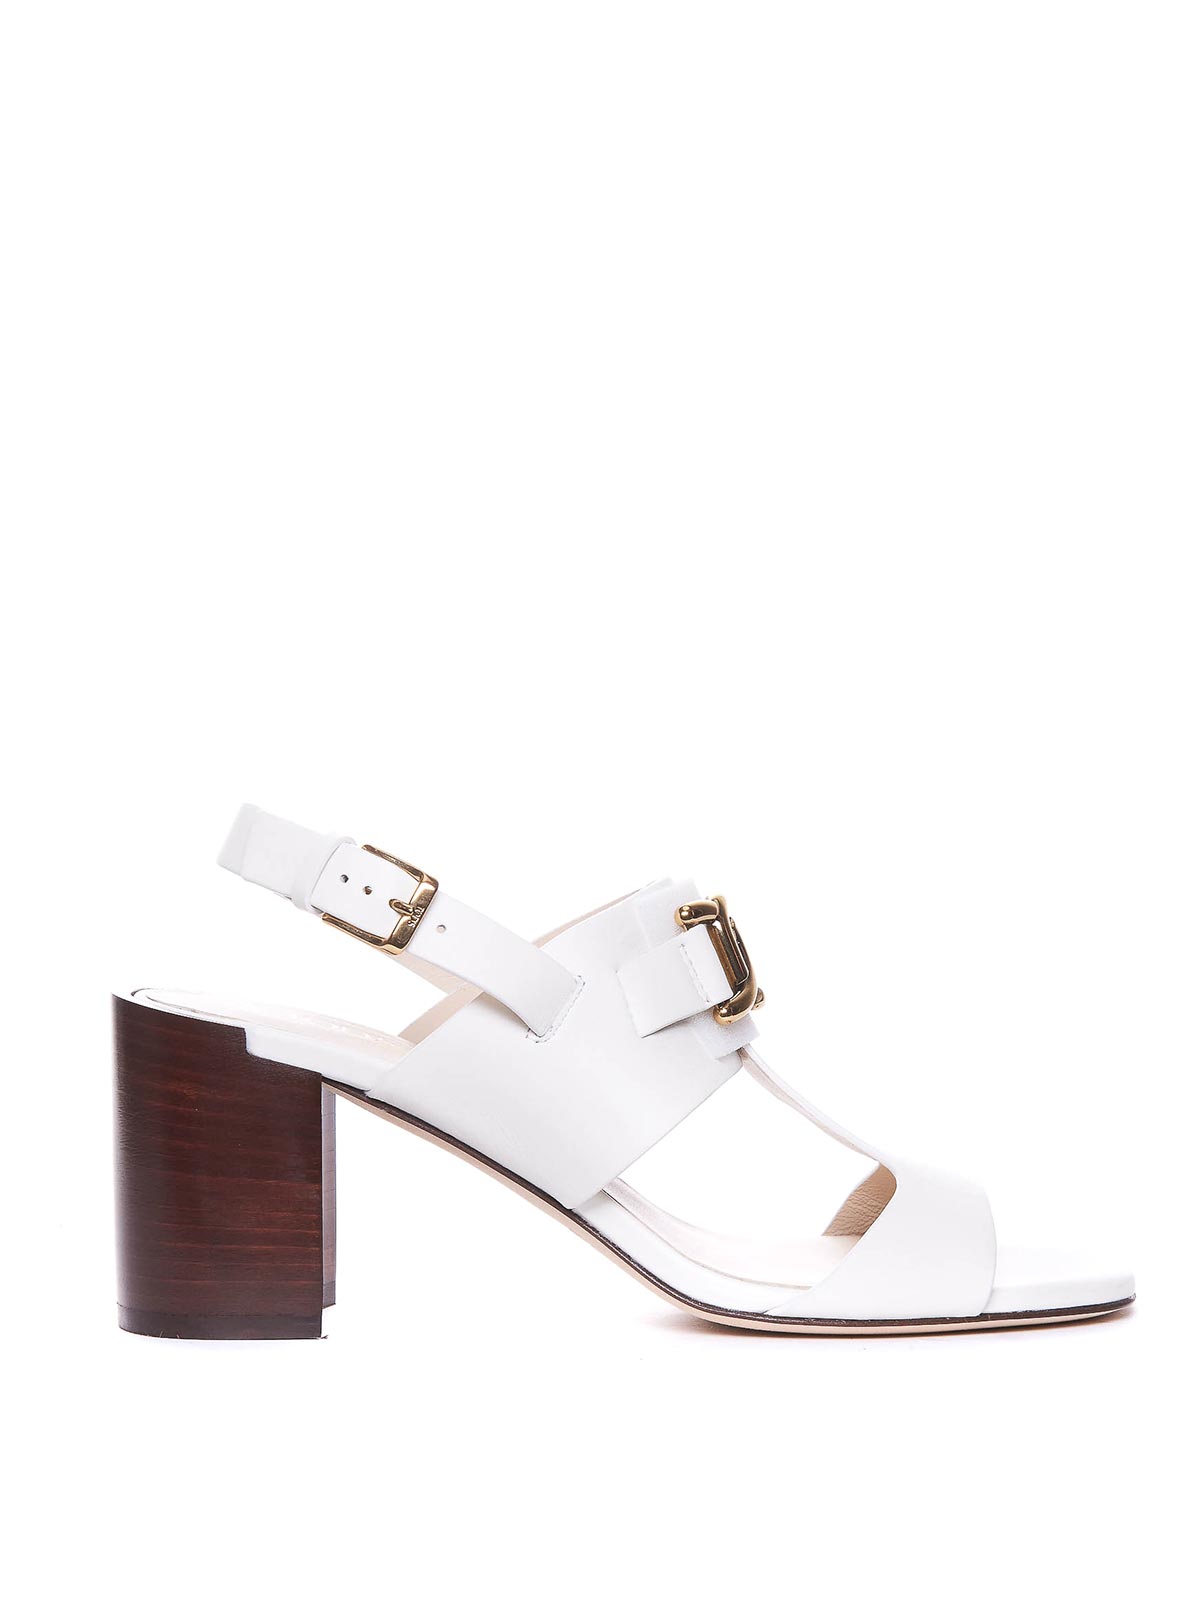 Shop Tod's White Pump Sandals Lateral Buckle